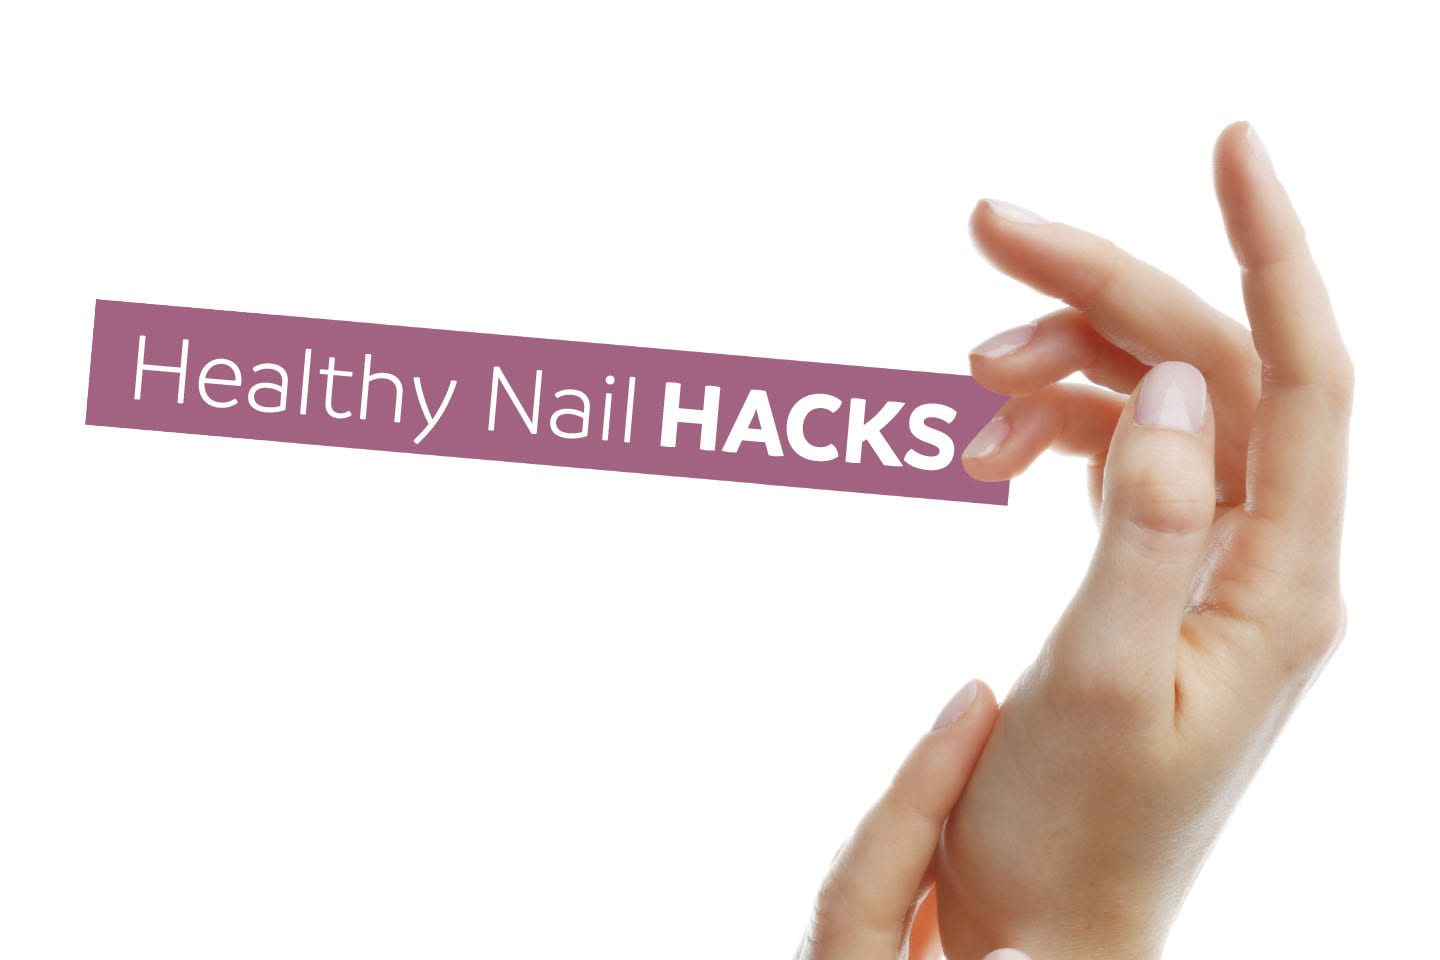 Graphic of text 'Healthy Nail Hacks' beside a woman's hands